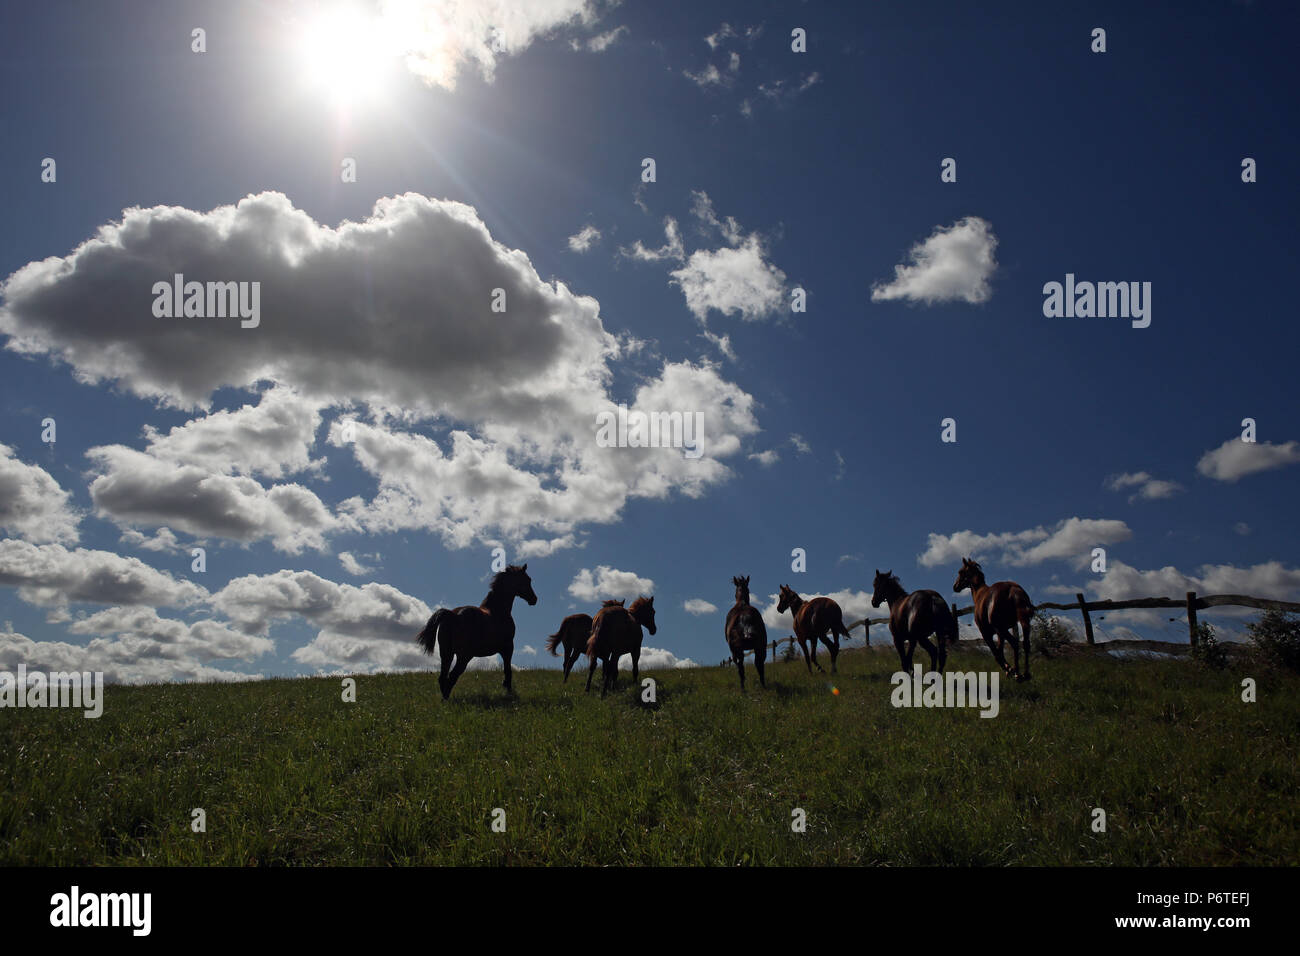 Studded Goerlsdorf, silhouette, galloping horses in a pasture Stock Photo